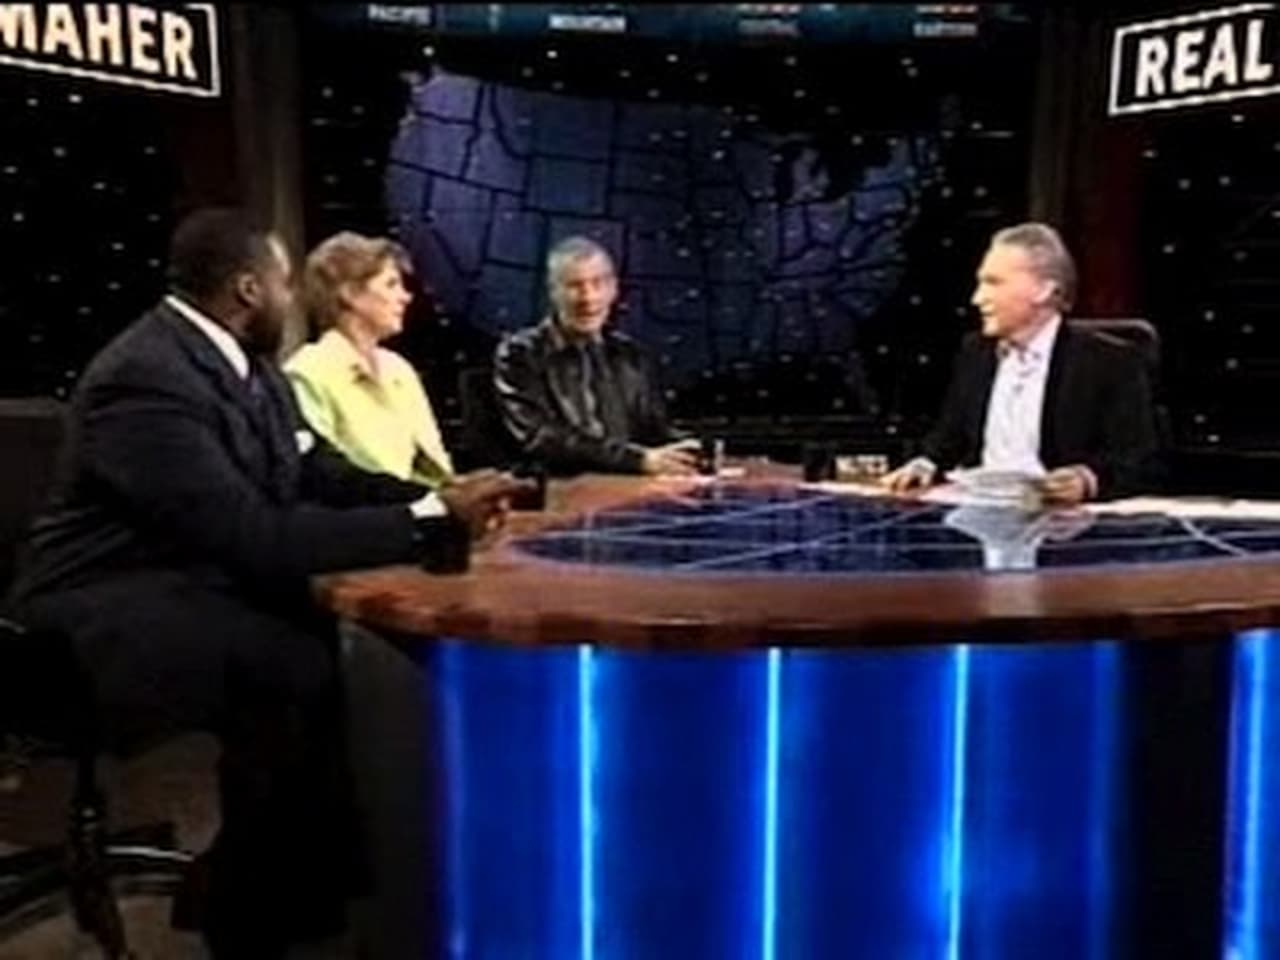 Real Time with Bill Maher - Season 2 Episode 7 : February 27, 2004